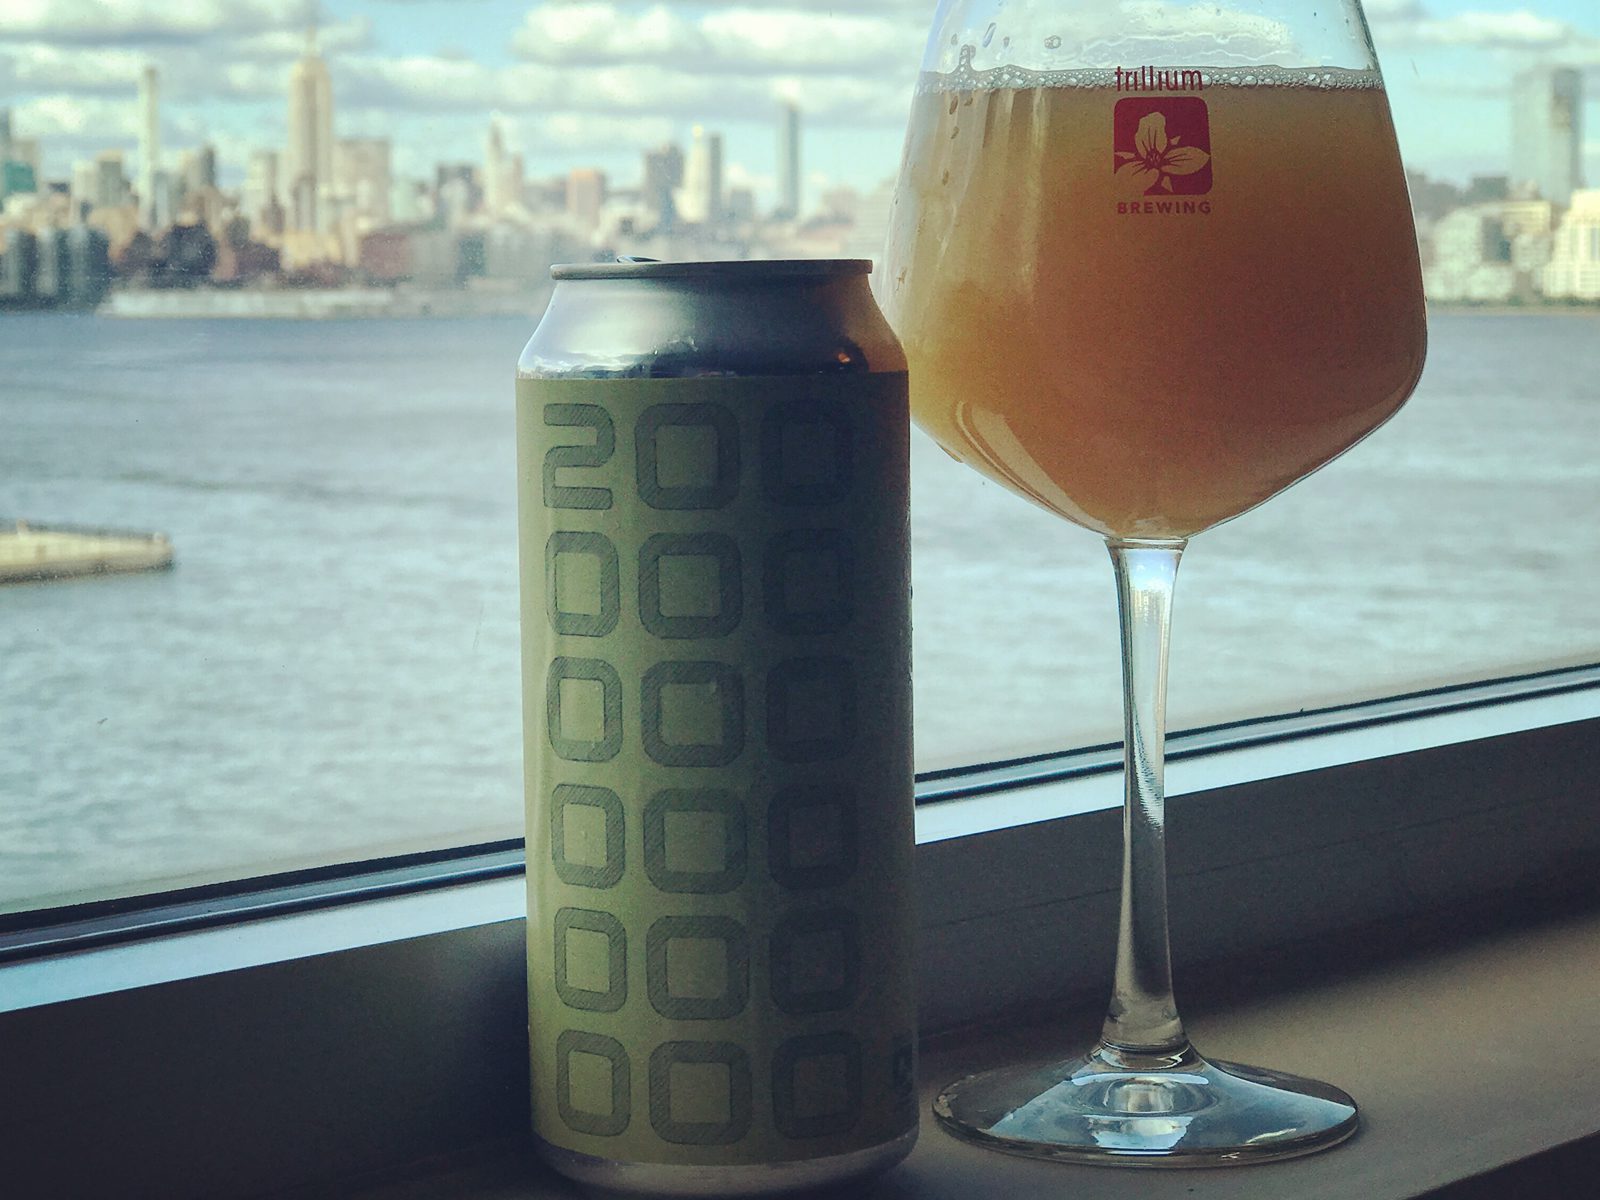 Trillium Beer Company and Other Half Brewing's Two Hundred Thousand Trillion